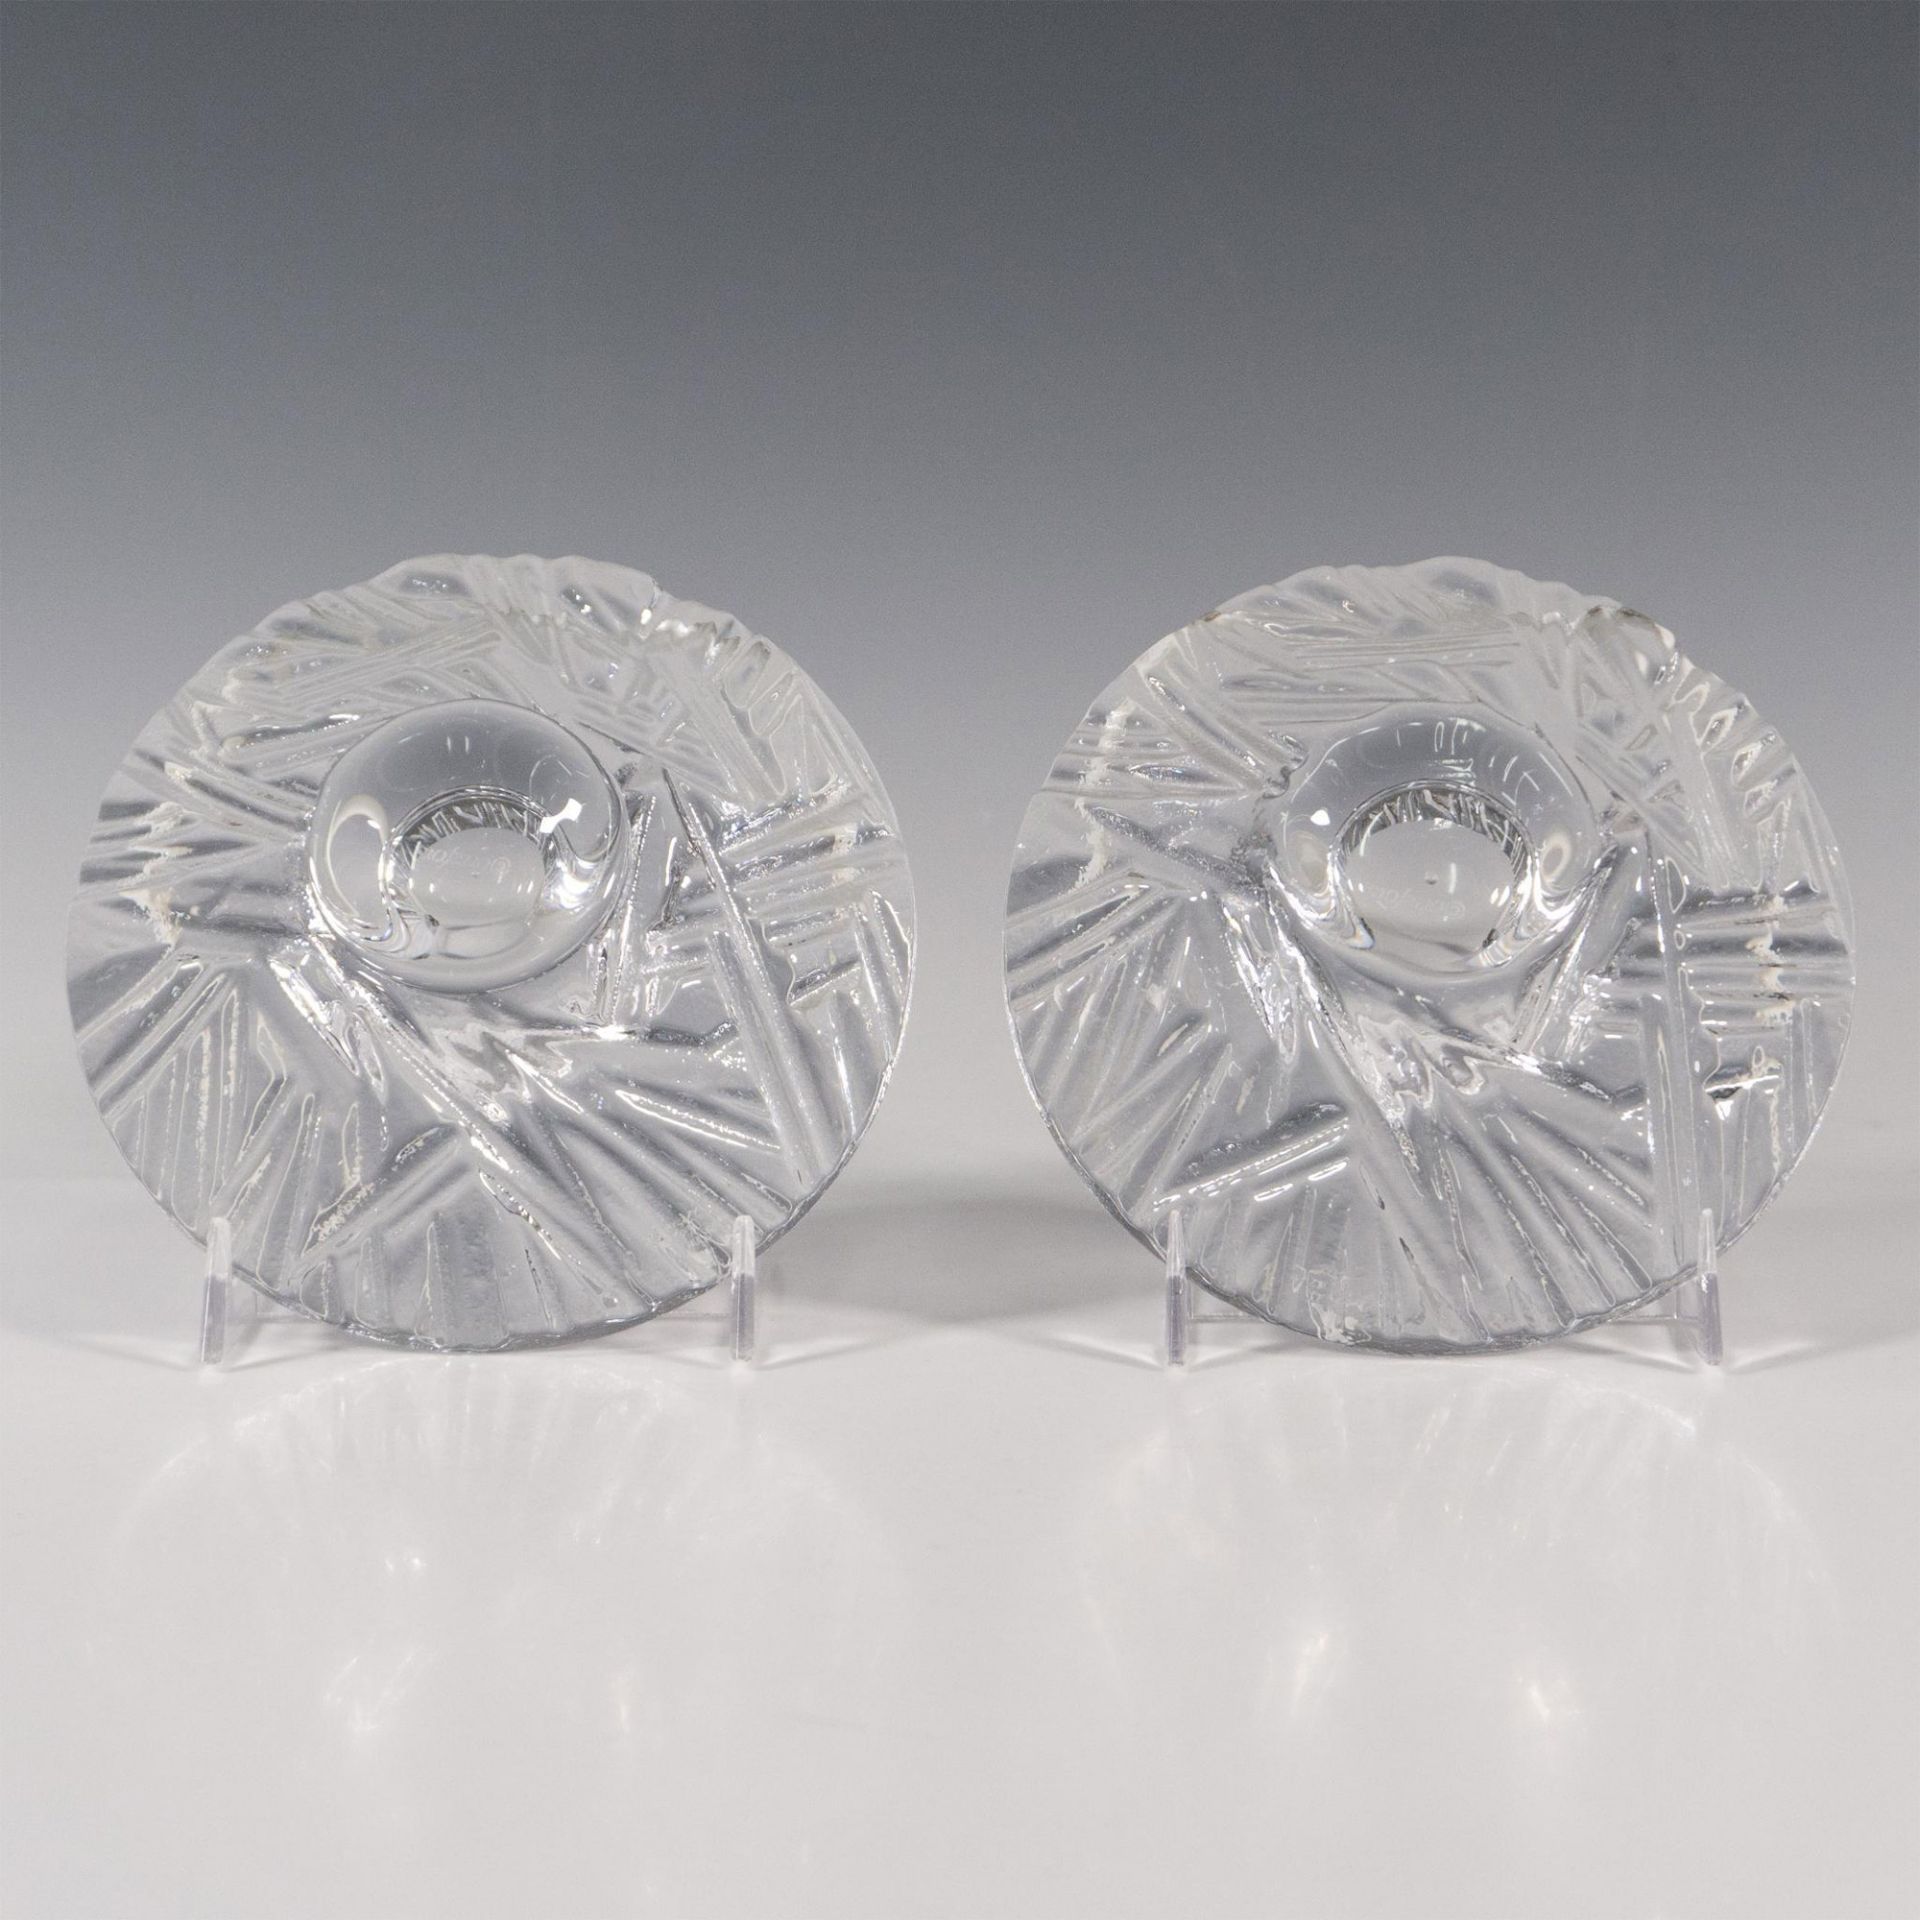 Pair of Orrefors Crystal Candle Holders, Icy Votive - Image 2 of 3